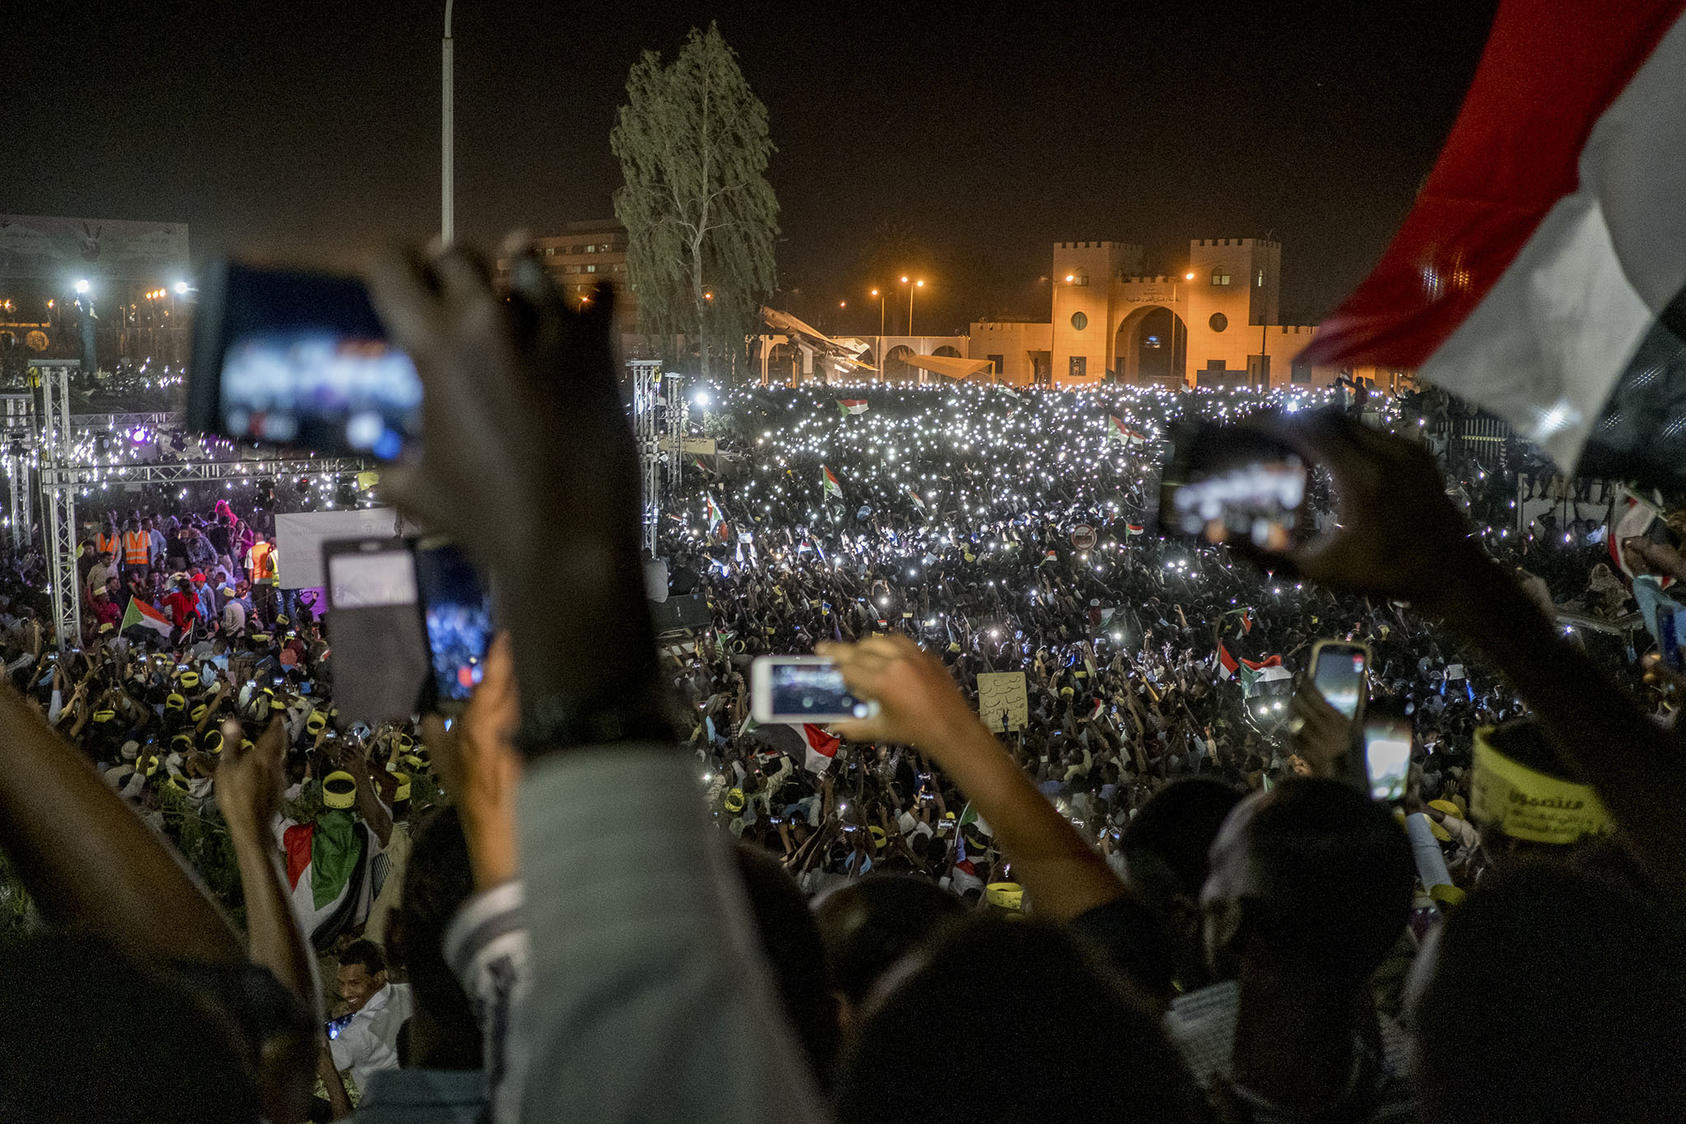 Protesters at a night rally outside the military headquarters in Khartoum, Sudan, April 21, 2019. (Declan Walsh/The New York Times)